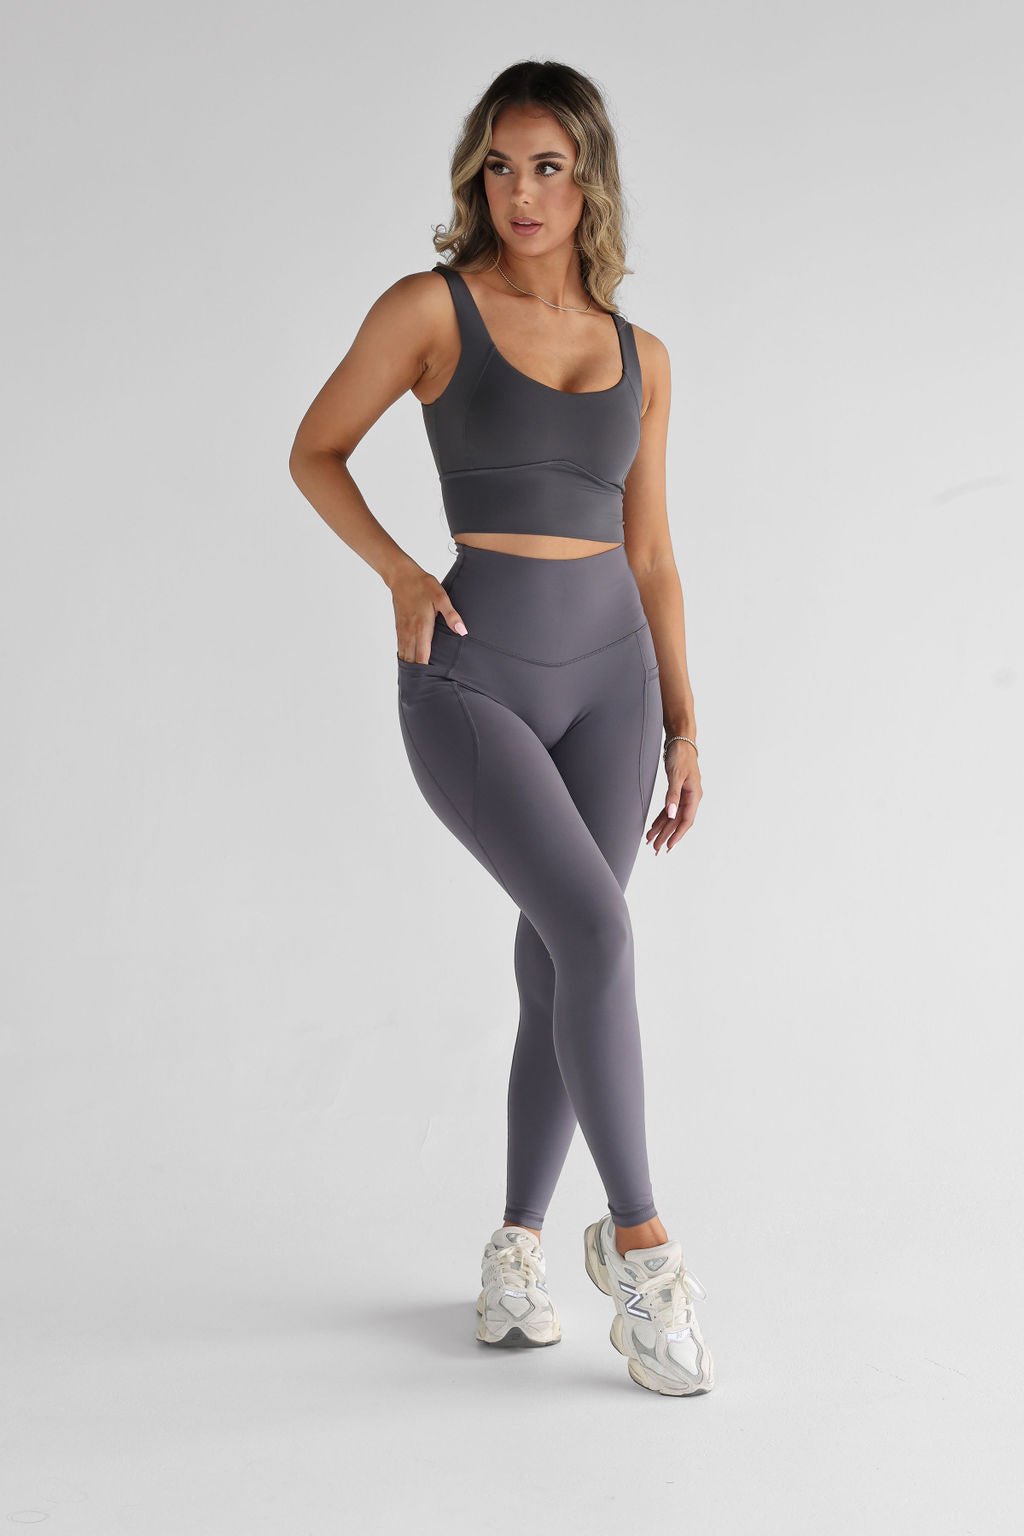 Coal Grey Leggings Women's - Available in Two Lengths